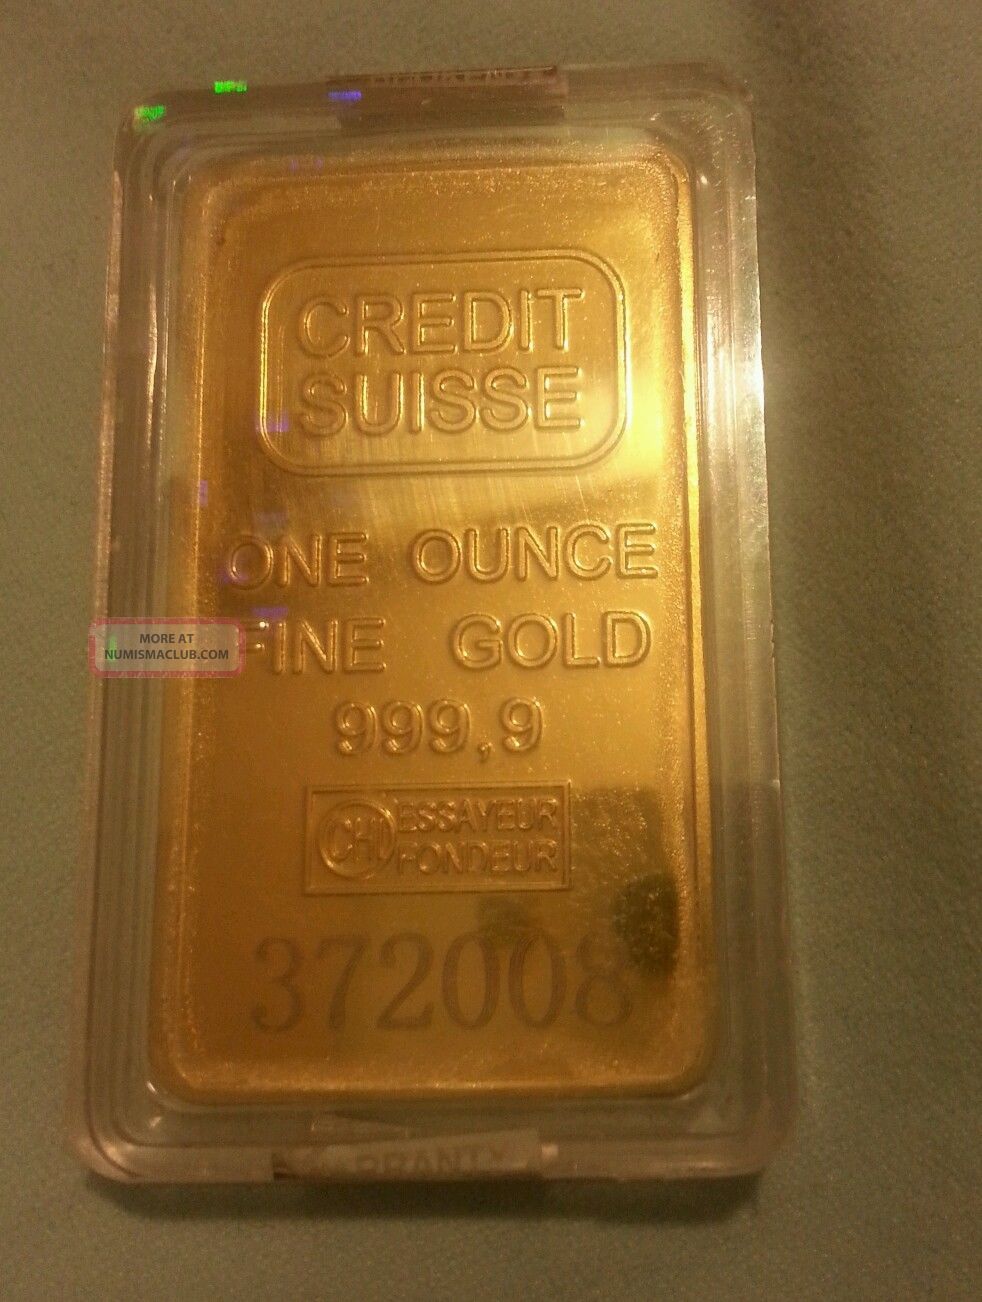 1 ounce credit suisse gold bar